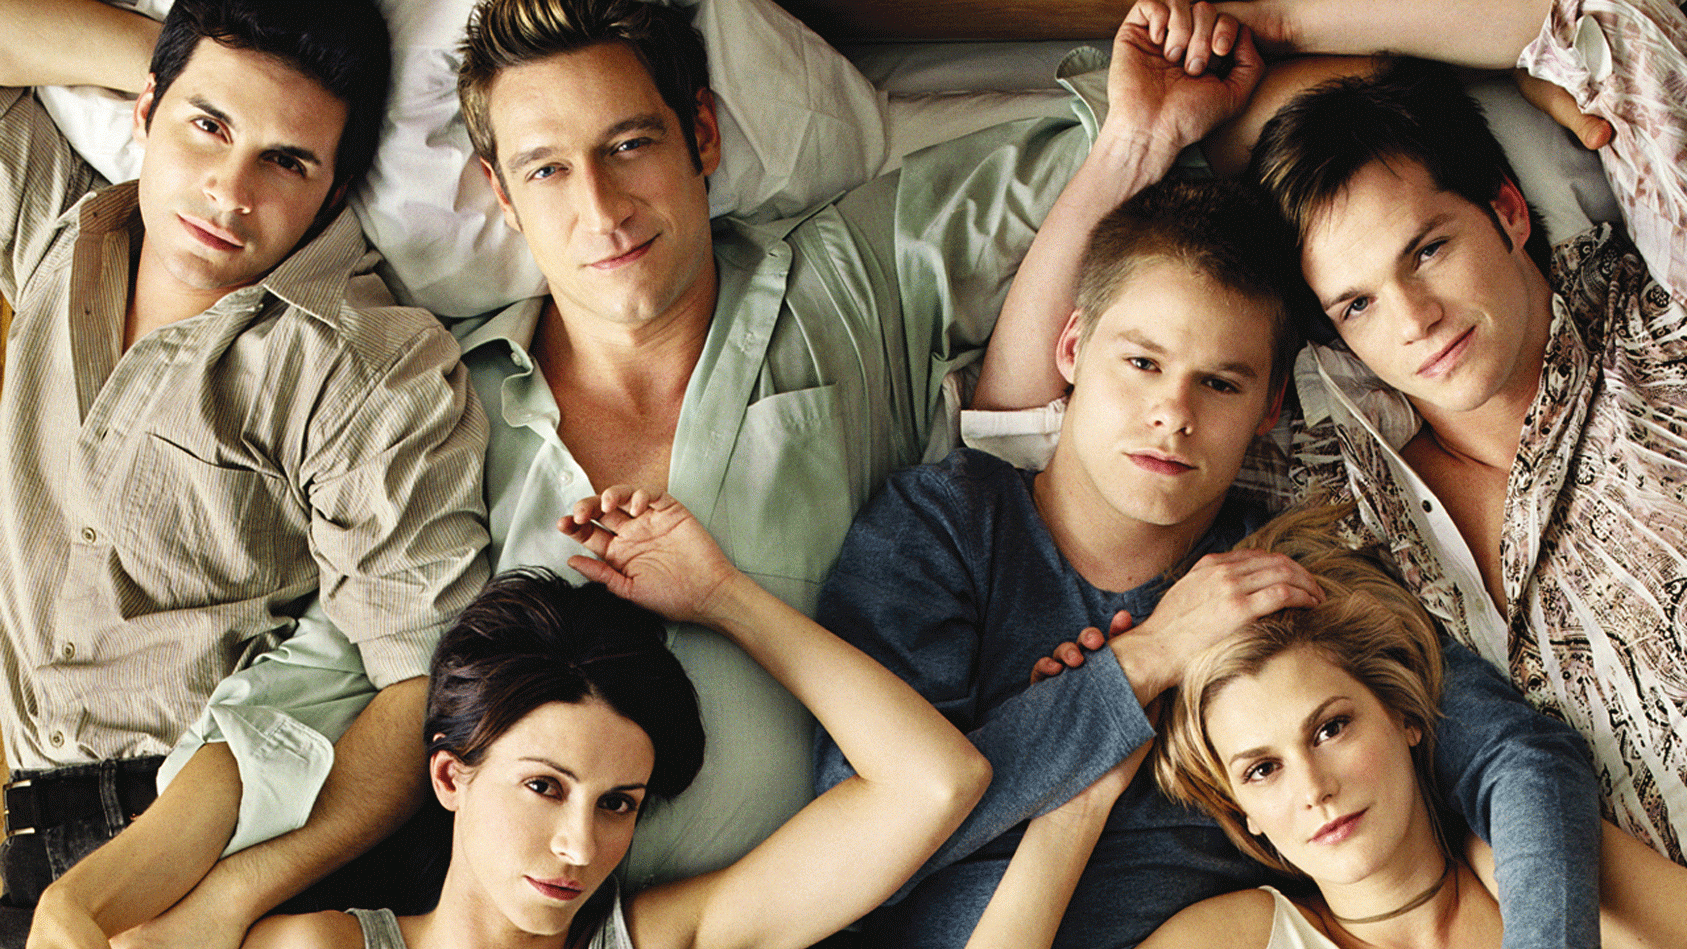 SHOWTIME’S ‘QUEER AS FOLK’